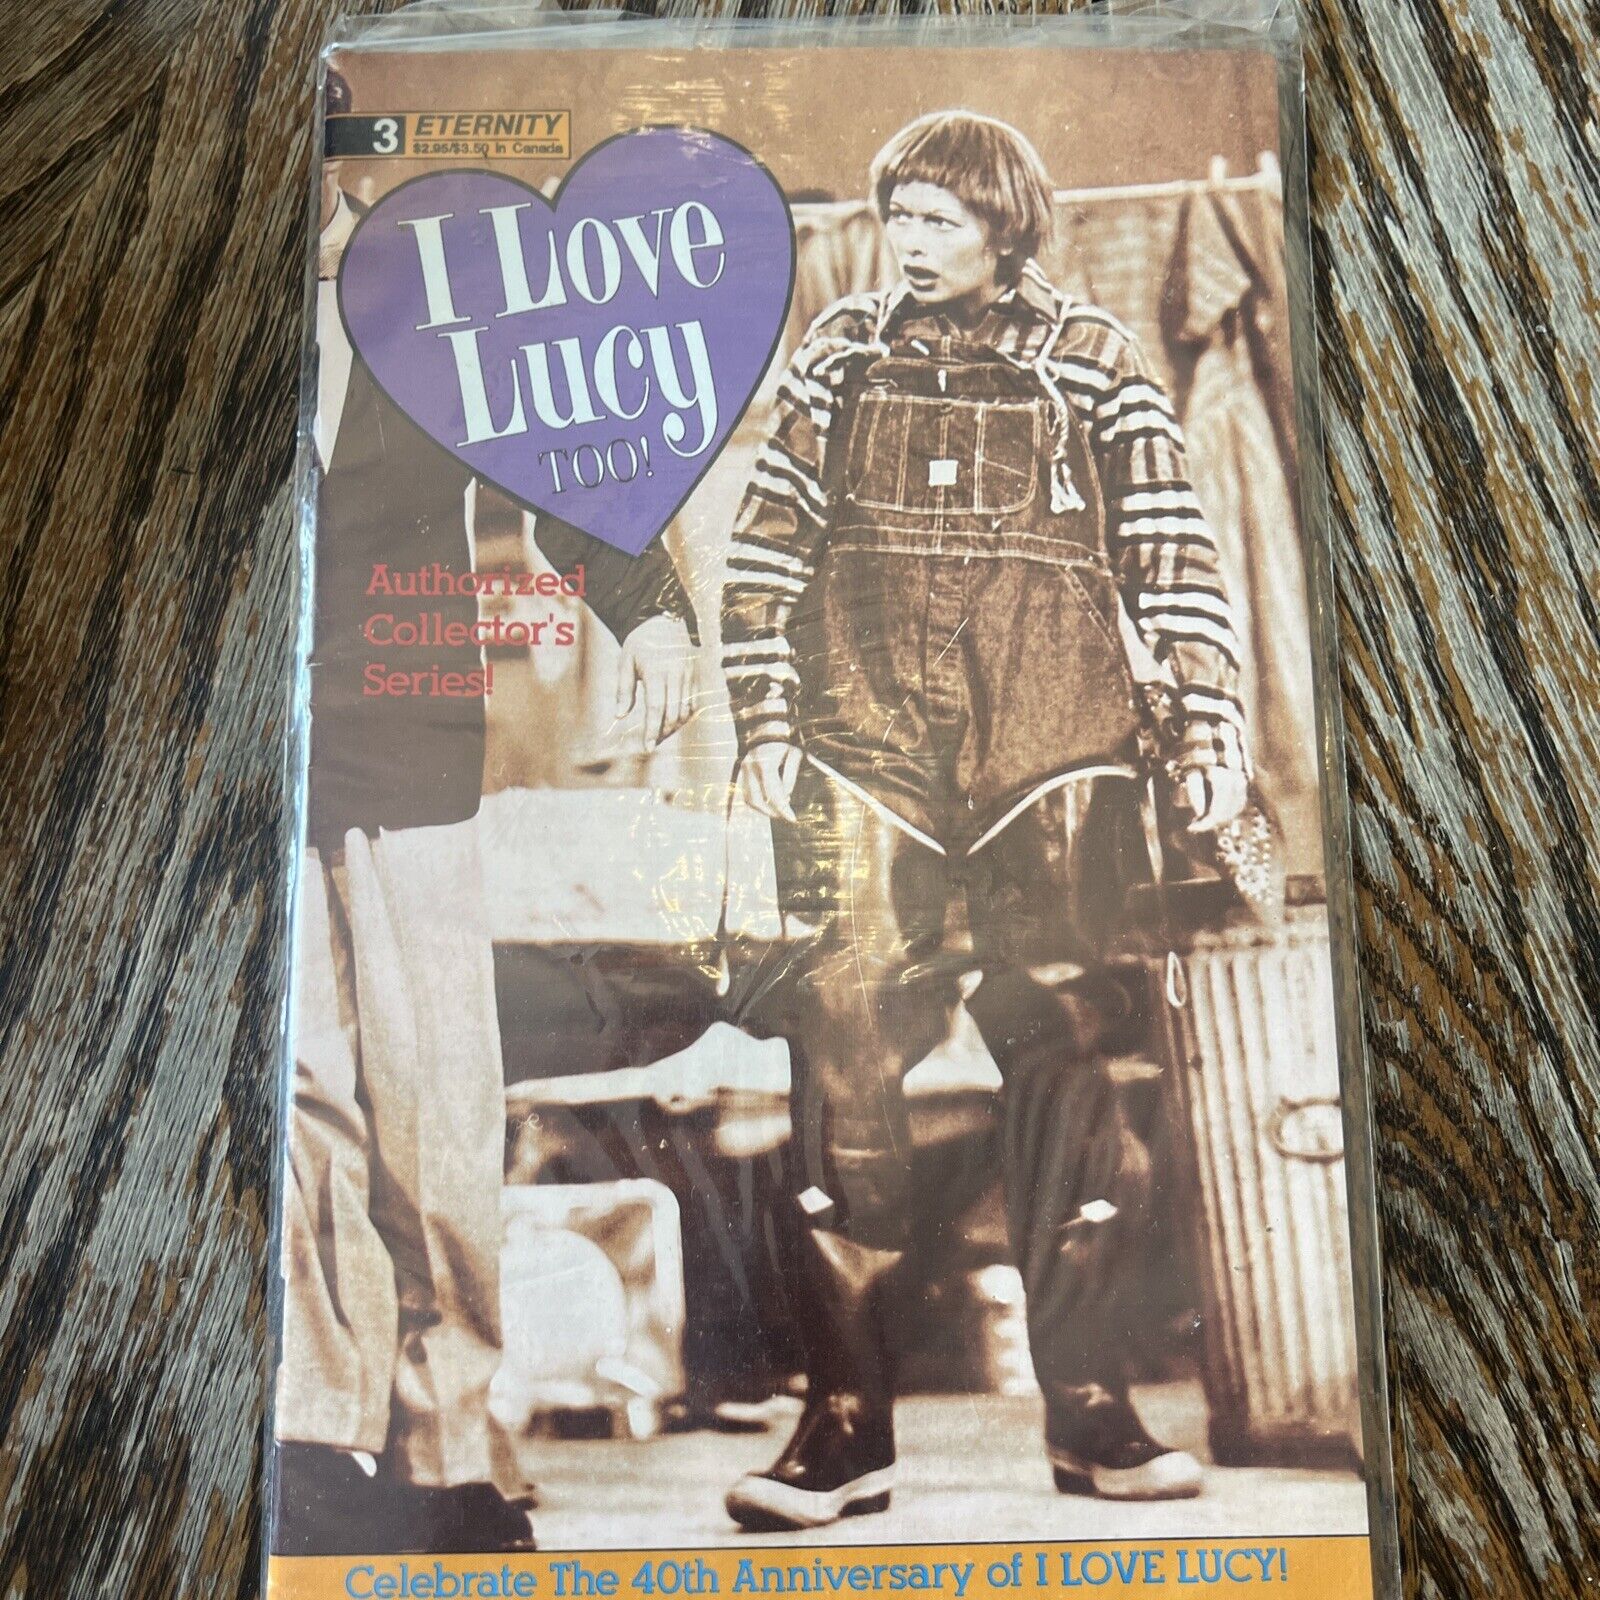 I LOVE LUCY VOL2 #3 COMIC BOOK VF LUCILLE BALL COVER